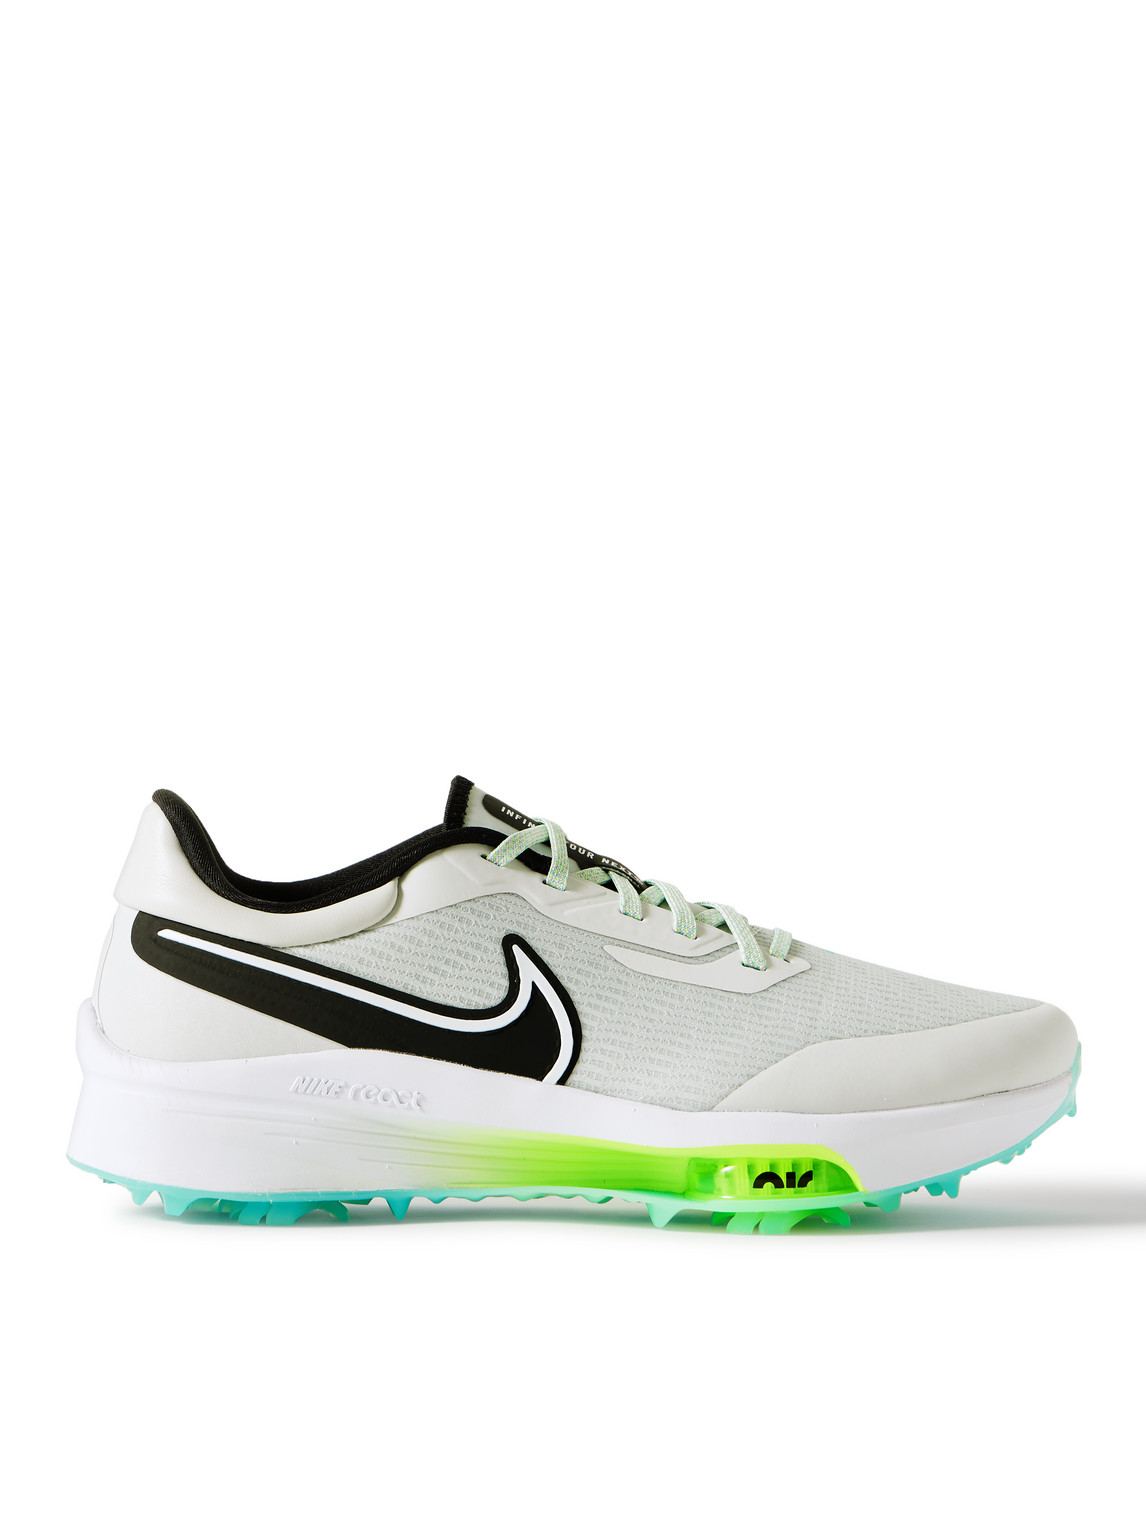 NIKE AIR ZOOM INFINITY TOUR RUBBER-TRIMMED FLYKNIT GOLF SHOES